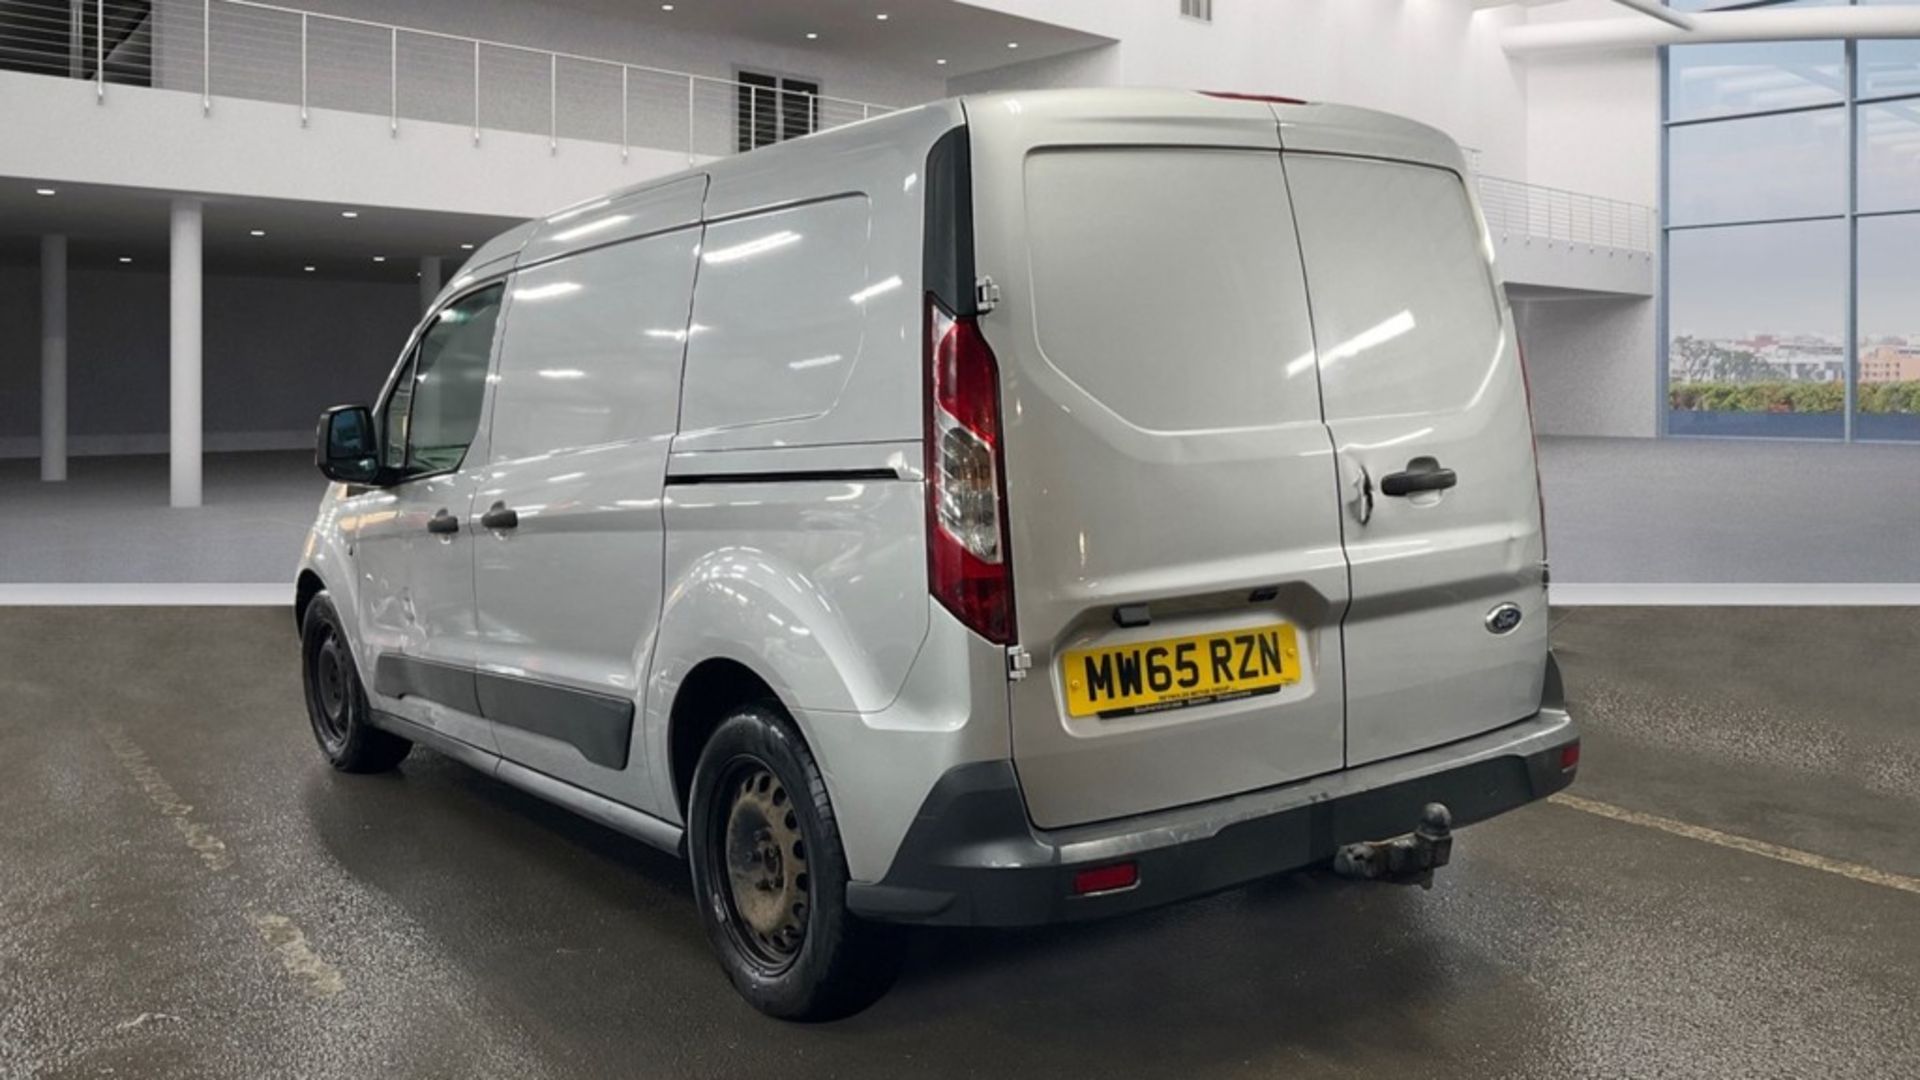 **ON SALE ** Ford Transit Connect 1.6 TDCI 95 240 L2H1 2015 -65 Reg' -Bluetooth Handsfree -Tow Bar - Image 3 of 9